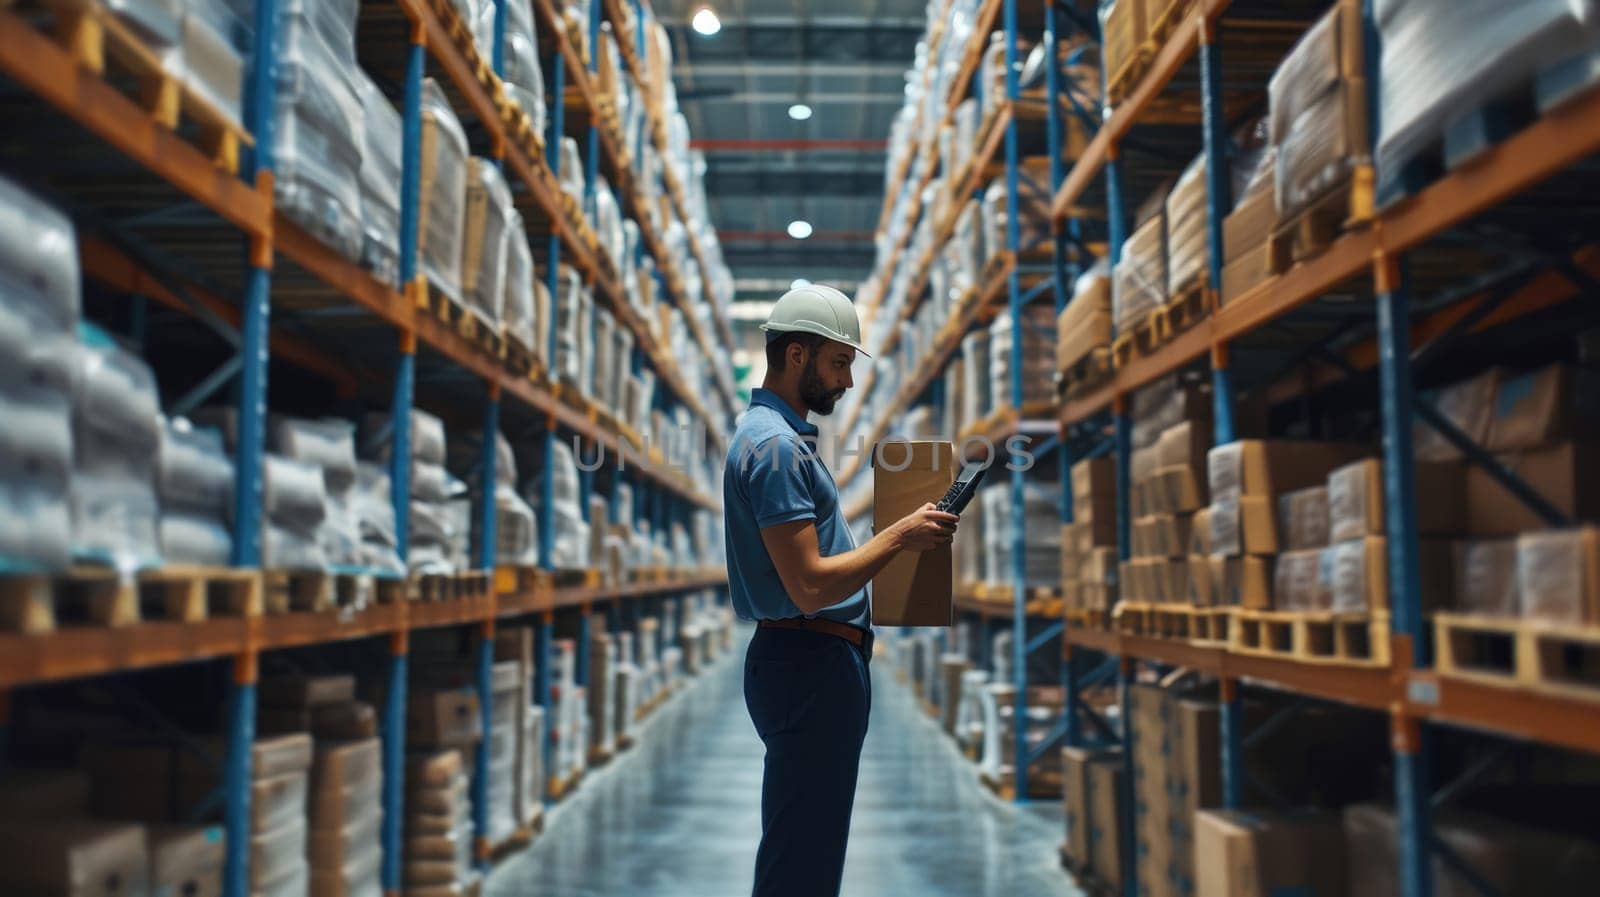 A man is standing in a warehouse looking at a tablet AIG41 by biancoblue